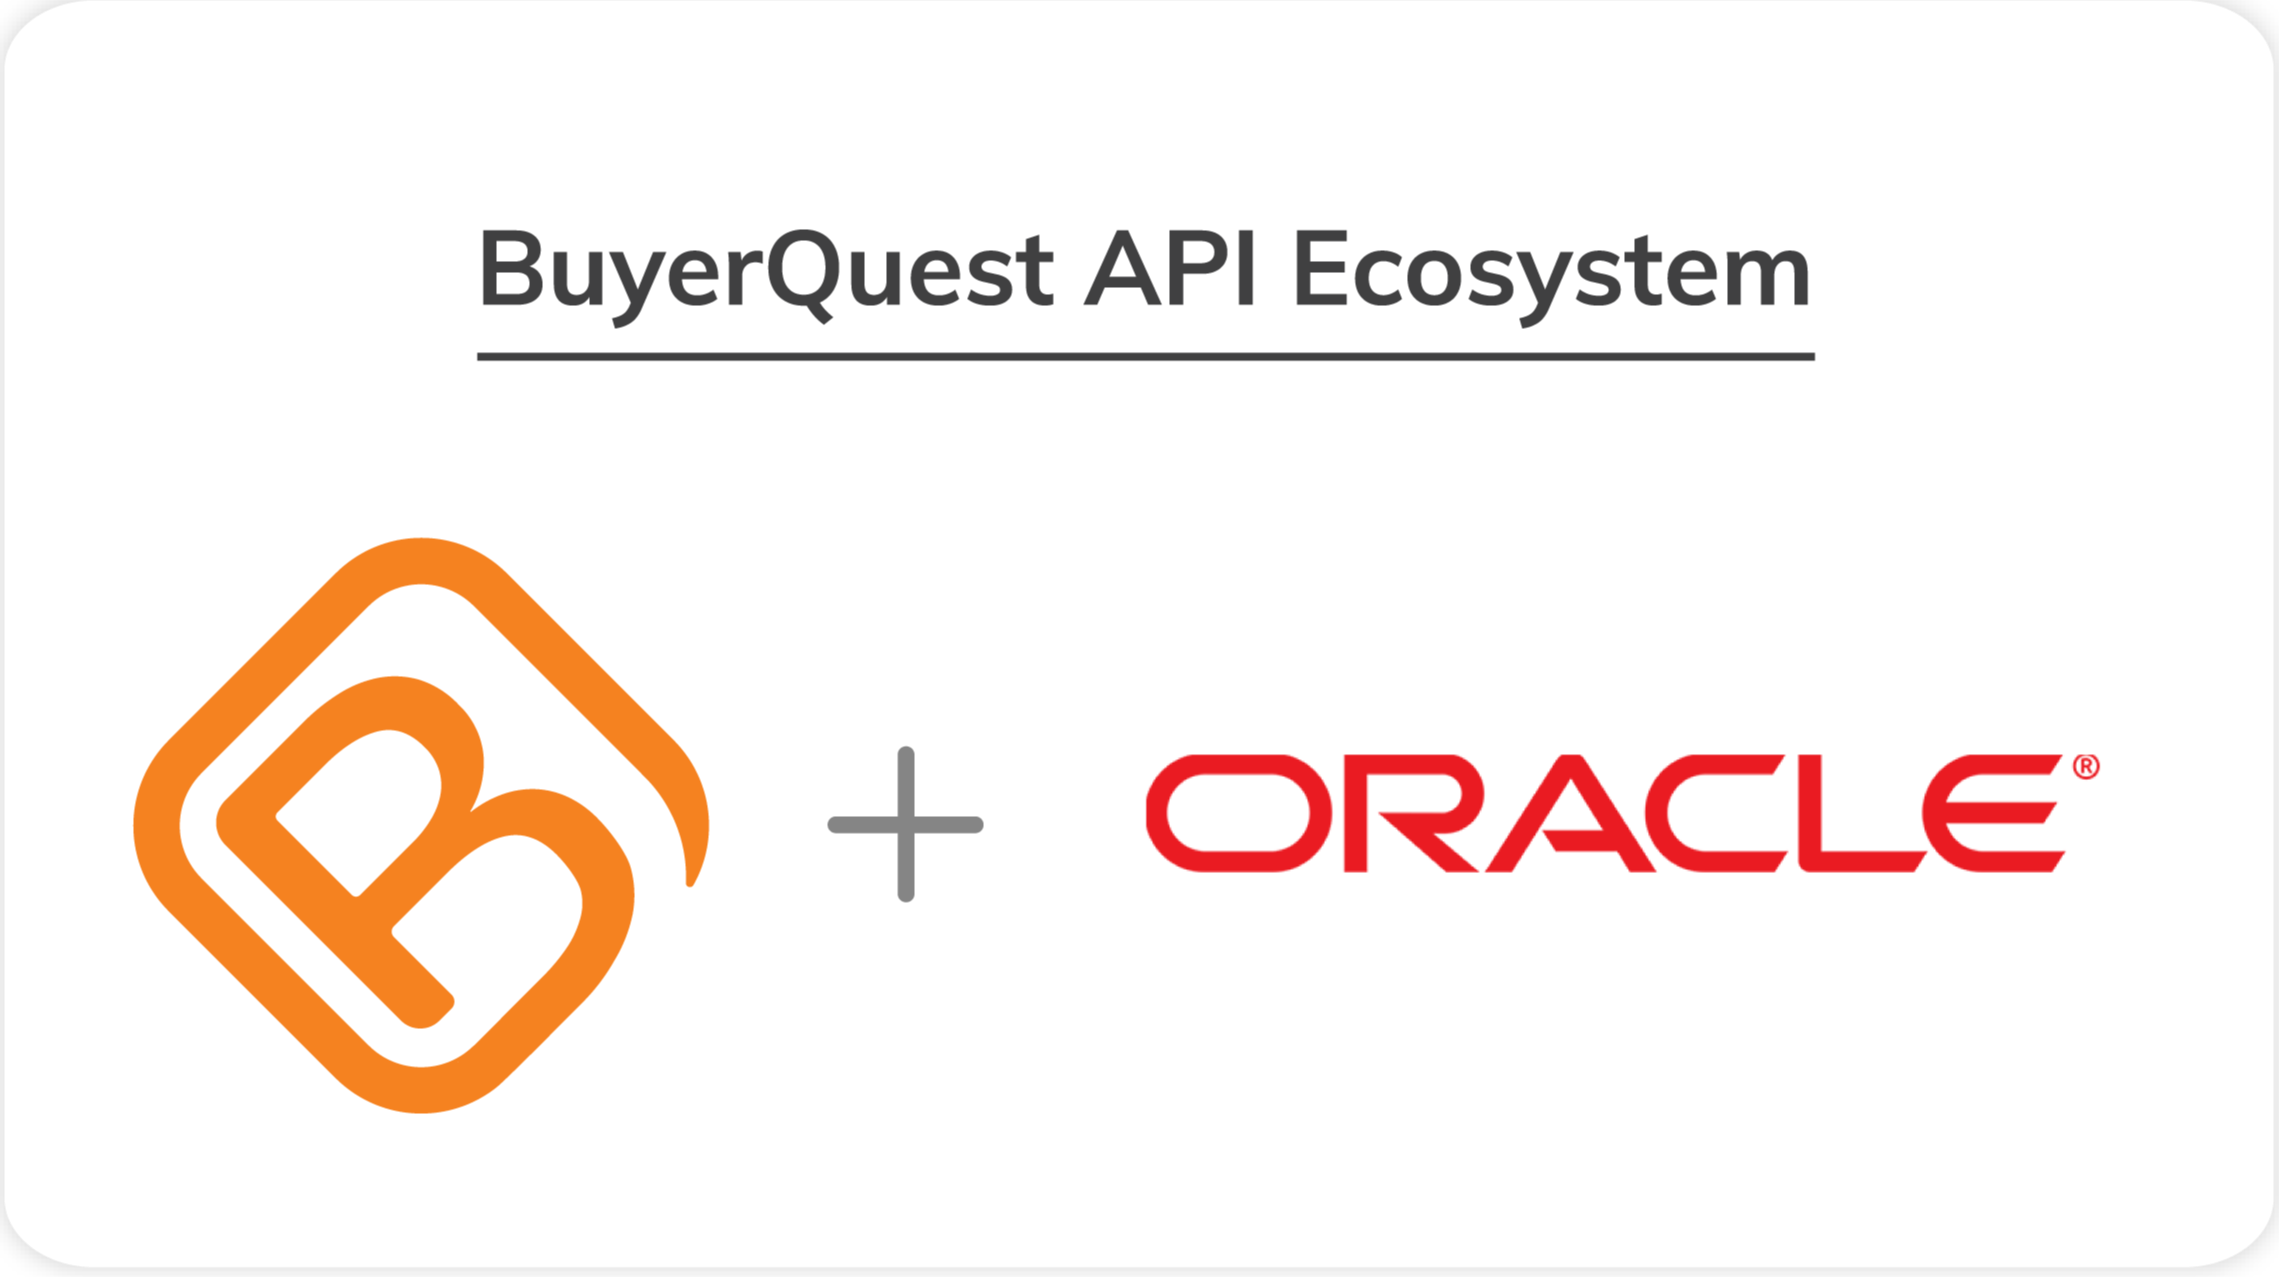 BuyerQuest and Oracle integration